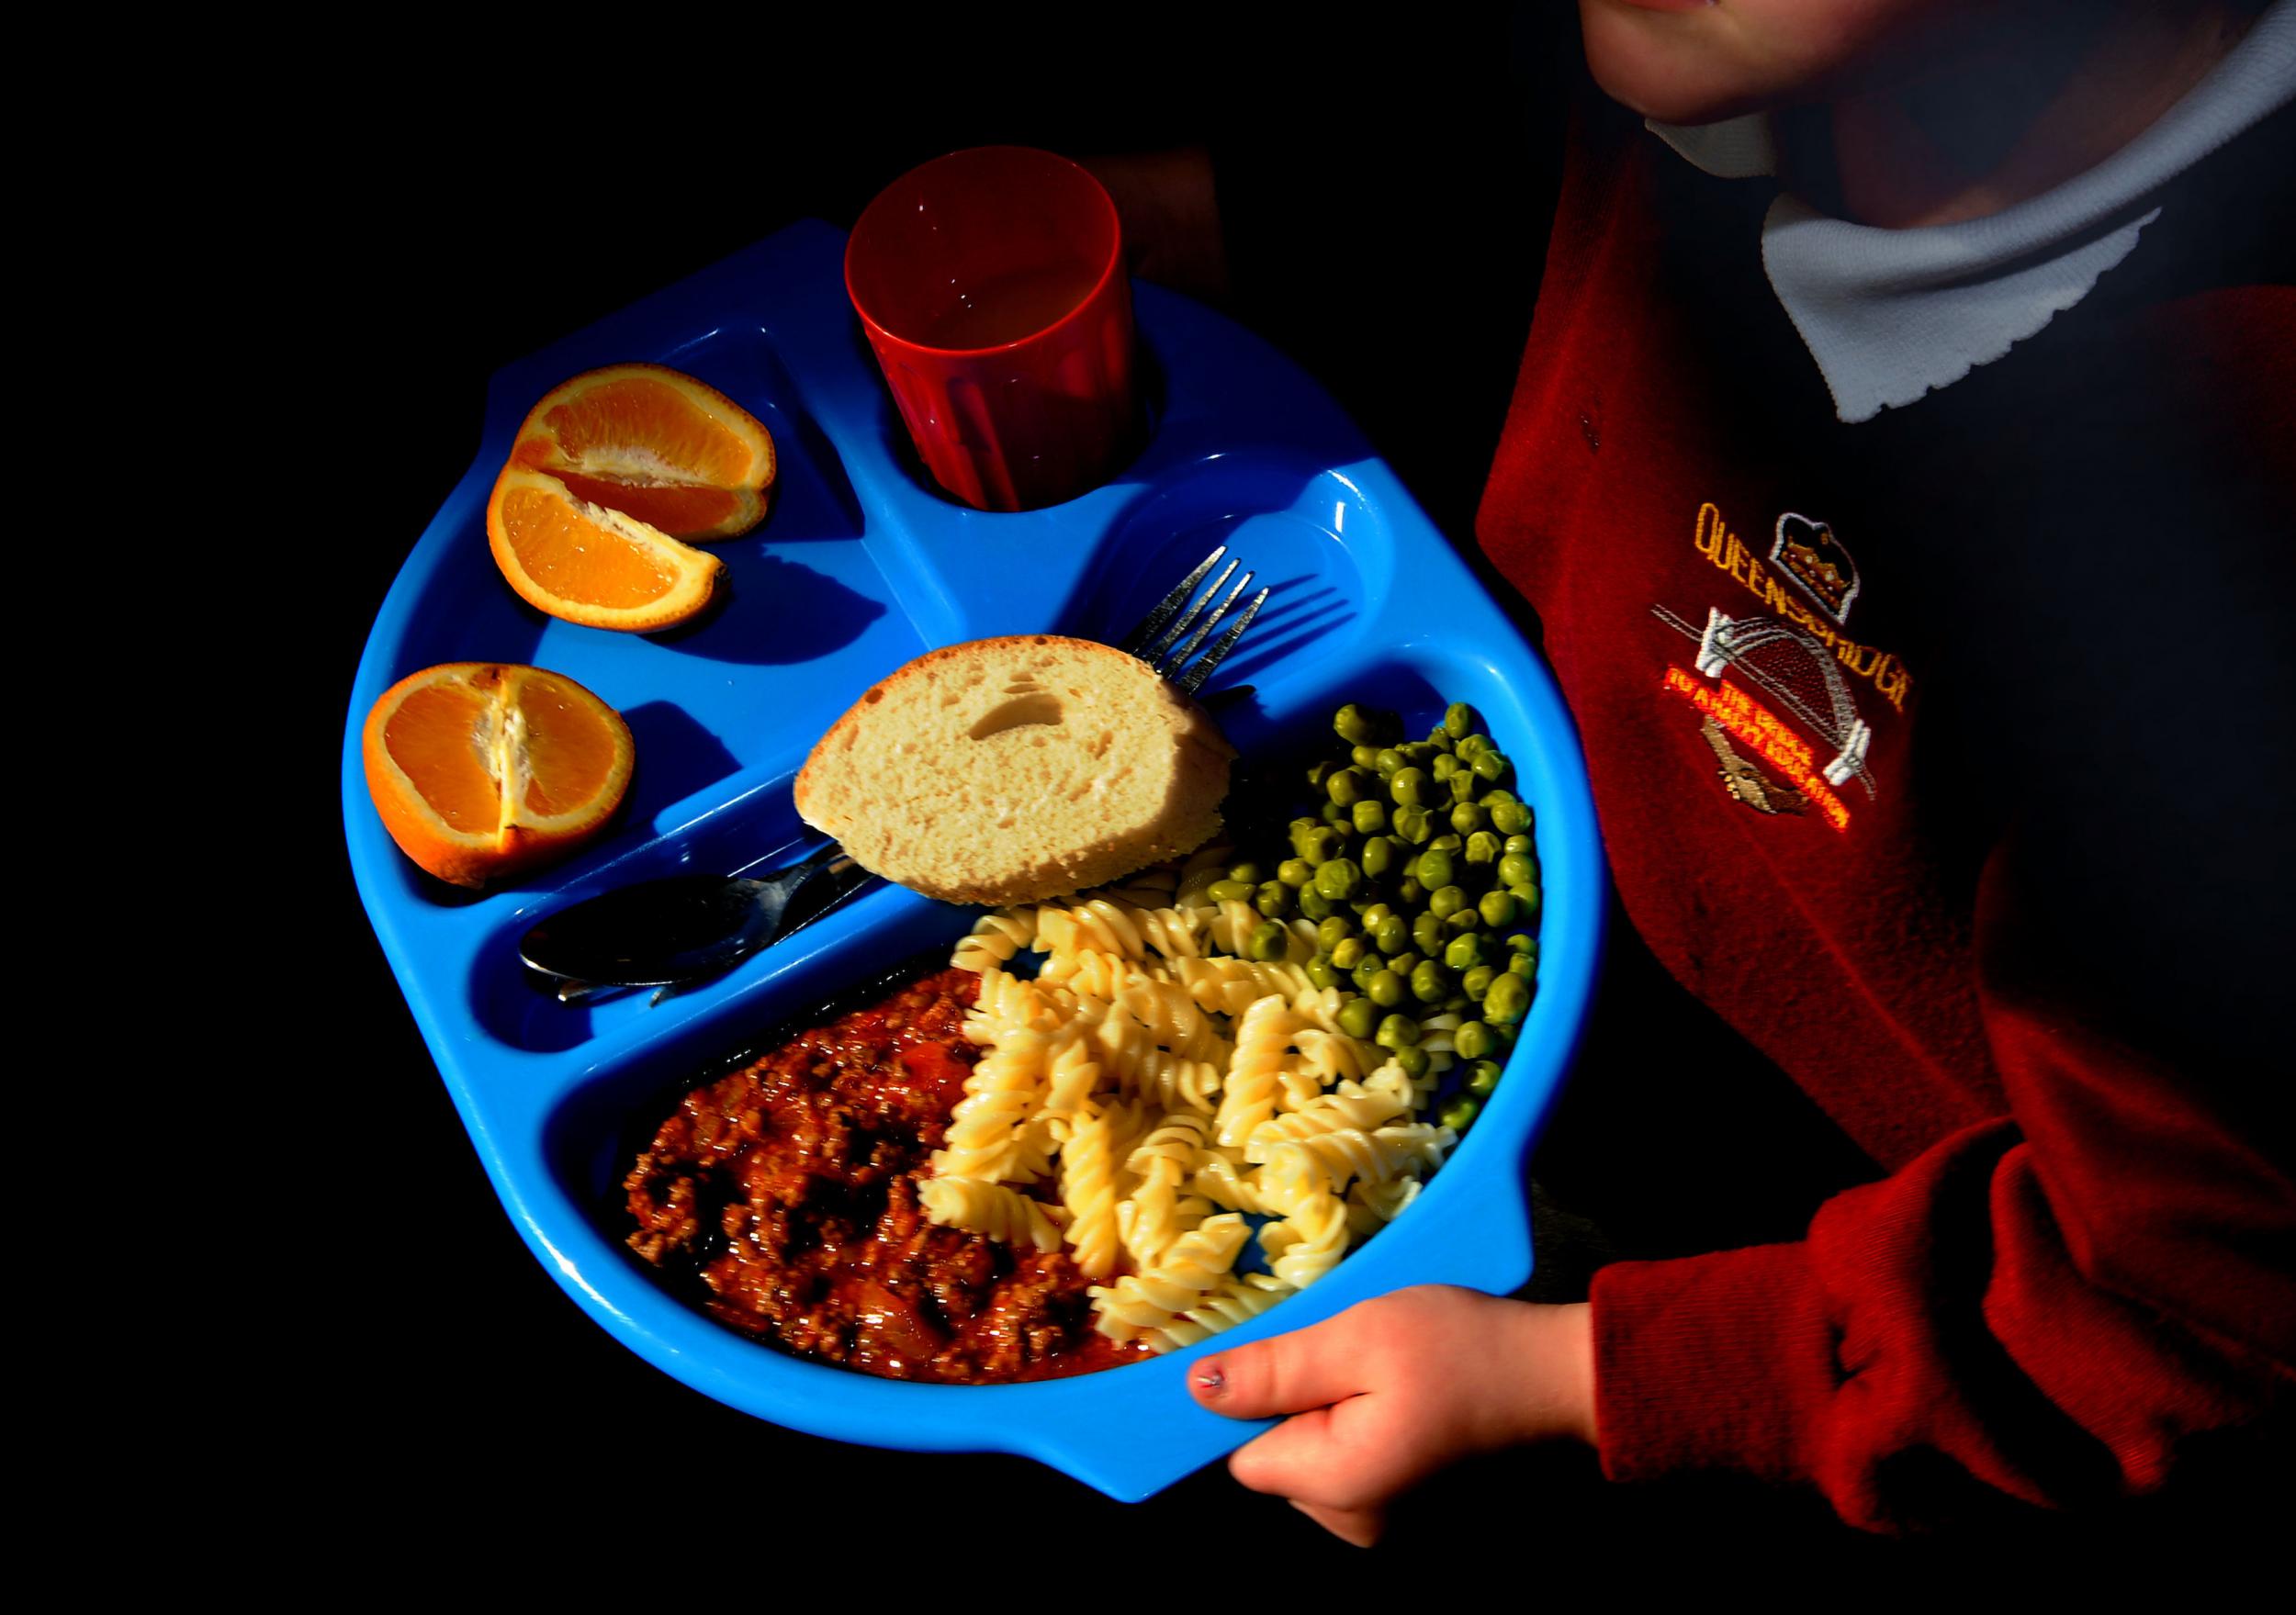 Around 18,000 students at 90 schools in Oxfordshire are supplied with dinners by Carillion